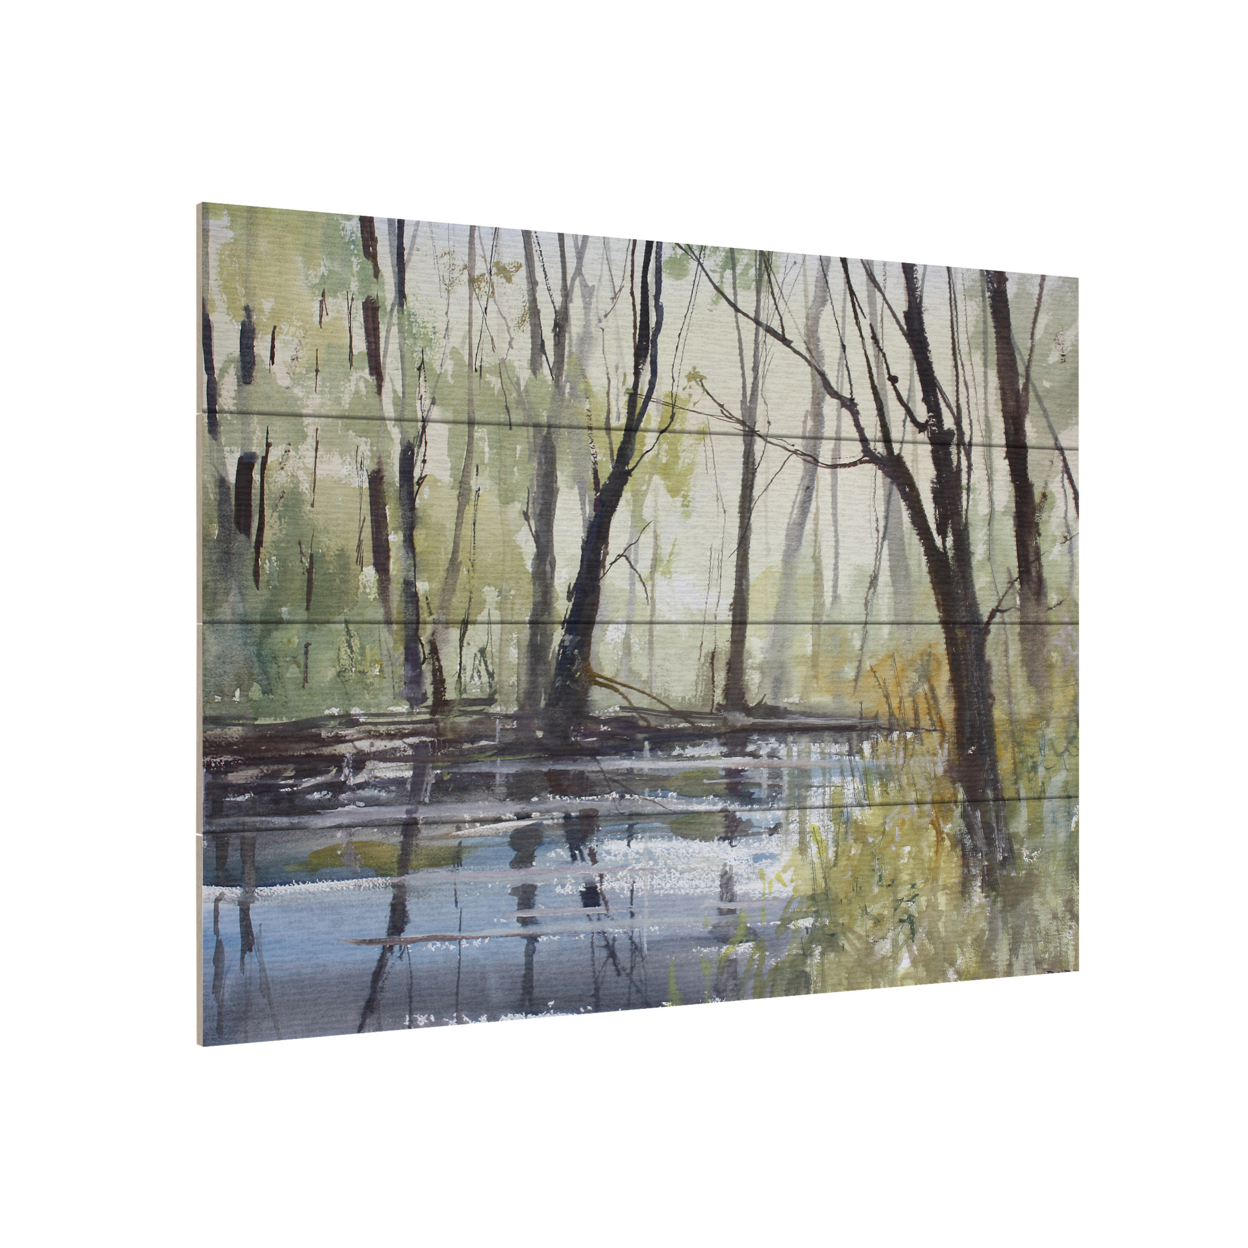 Wall Art 12 X 16 Inches Titled Pine River Reflections Ready To Hang Printed On Wooden Planks